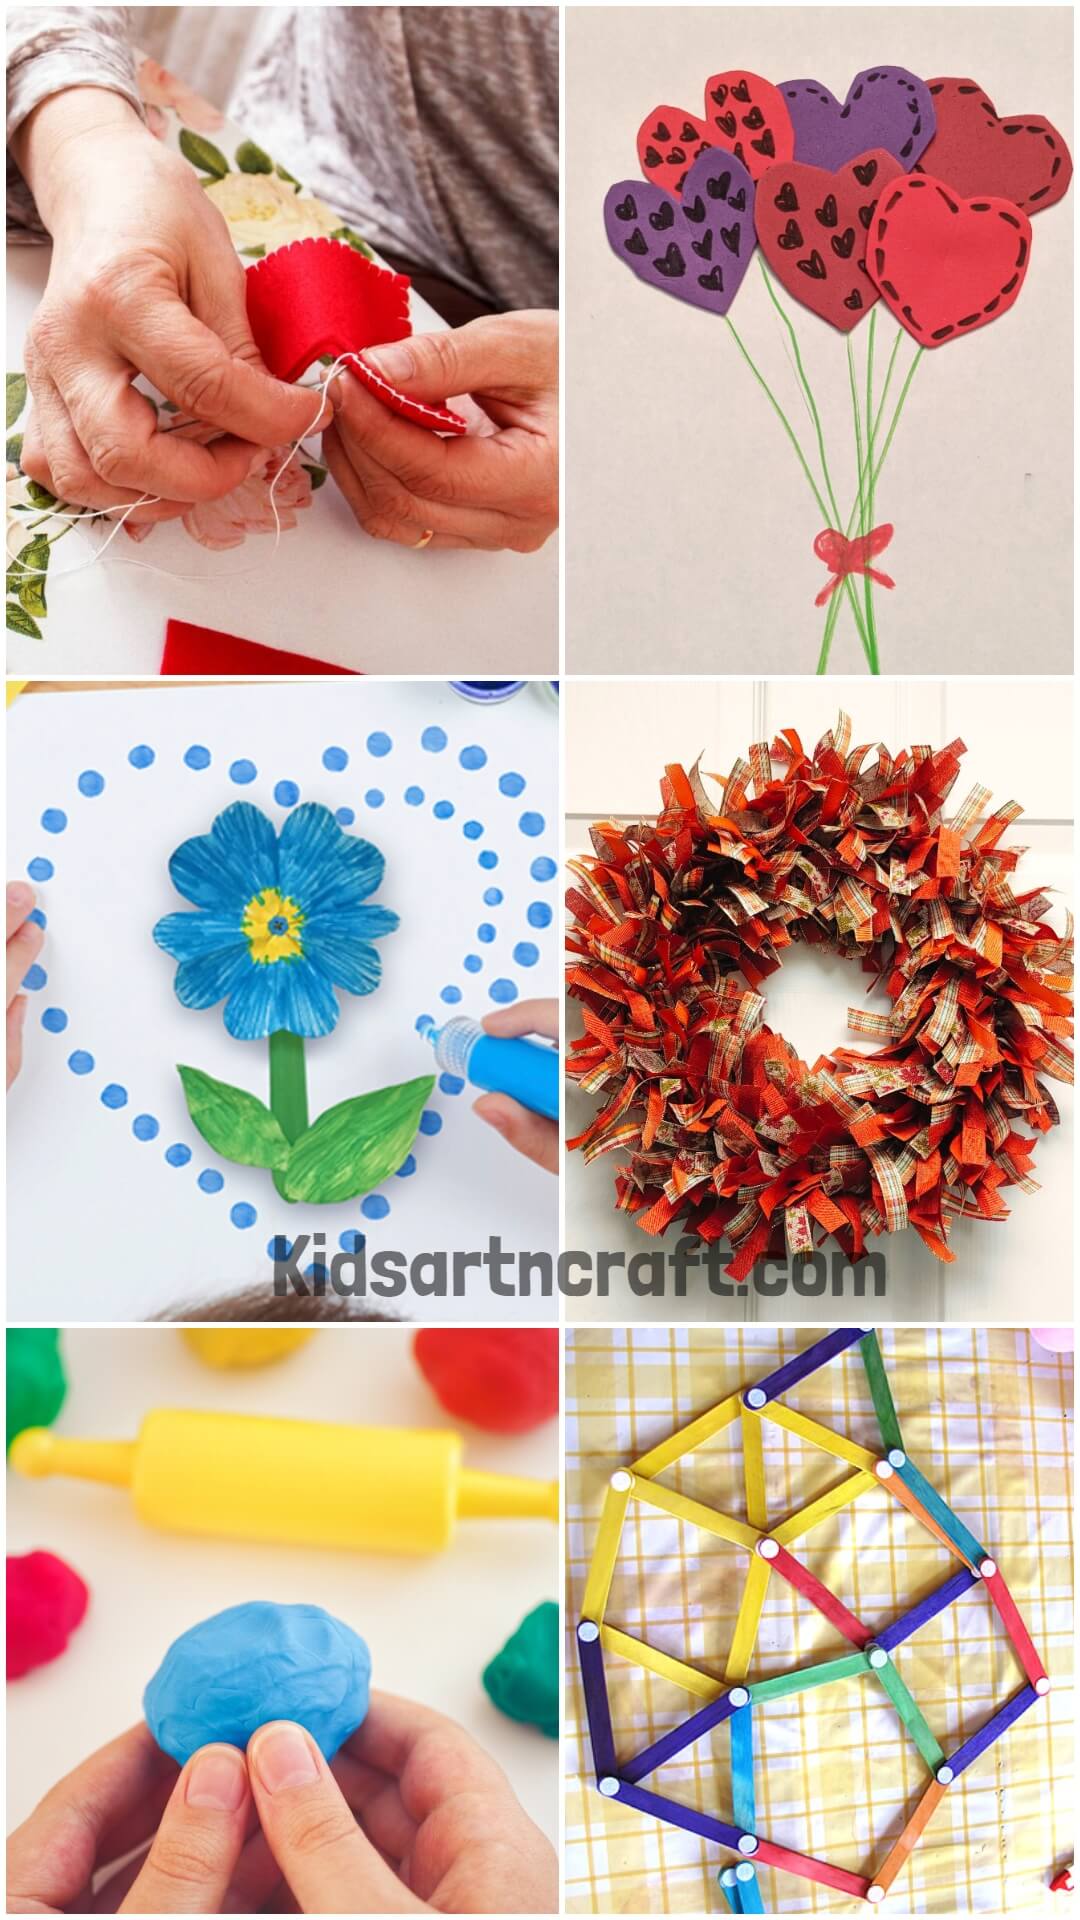  Easy crafts for seniors with dementia